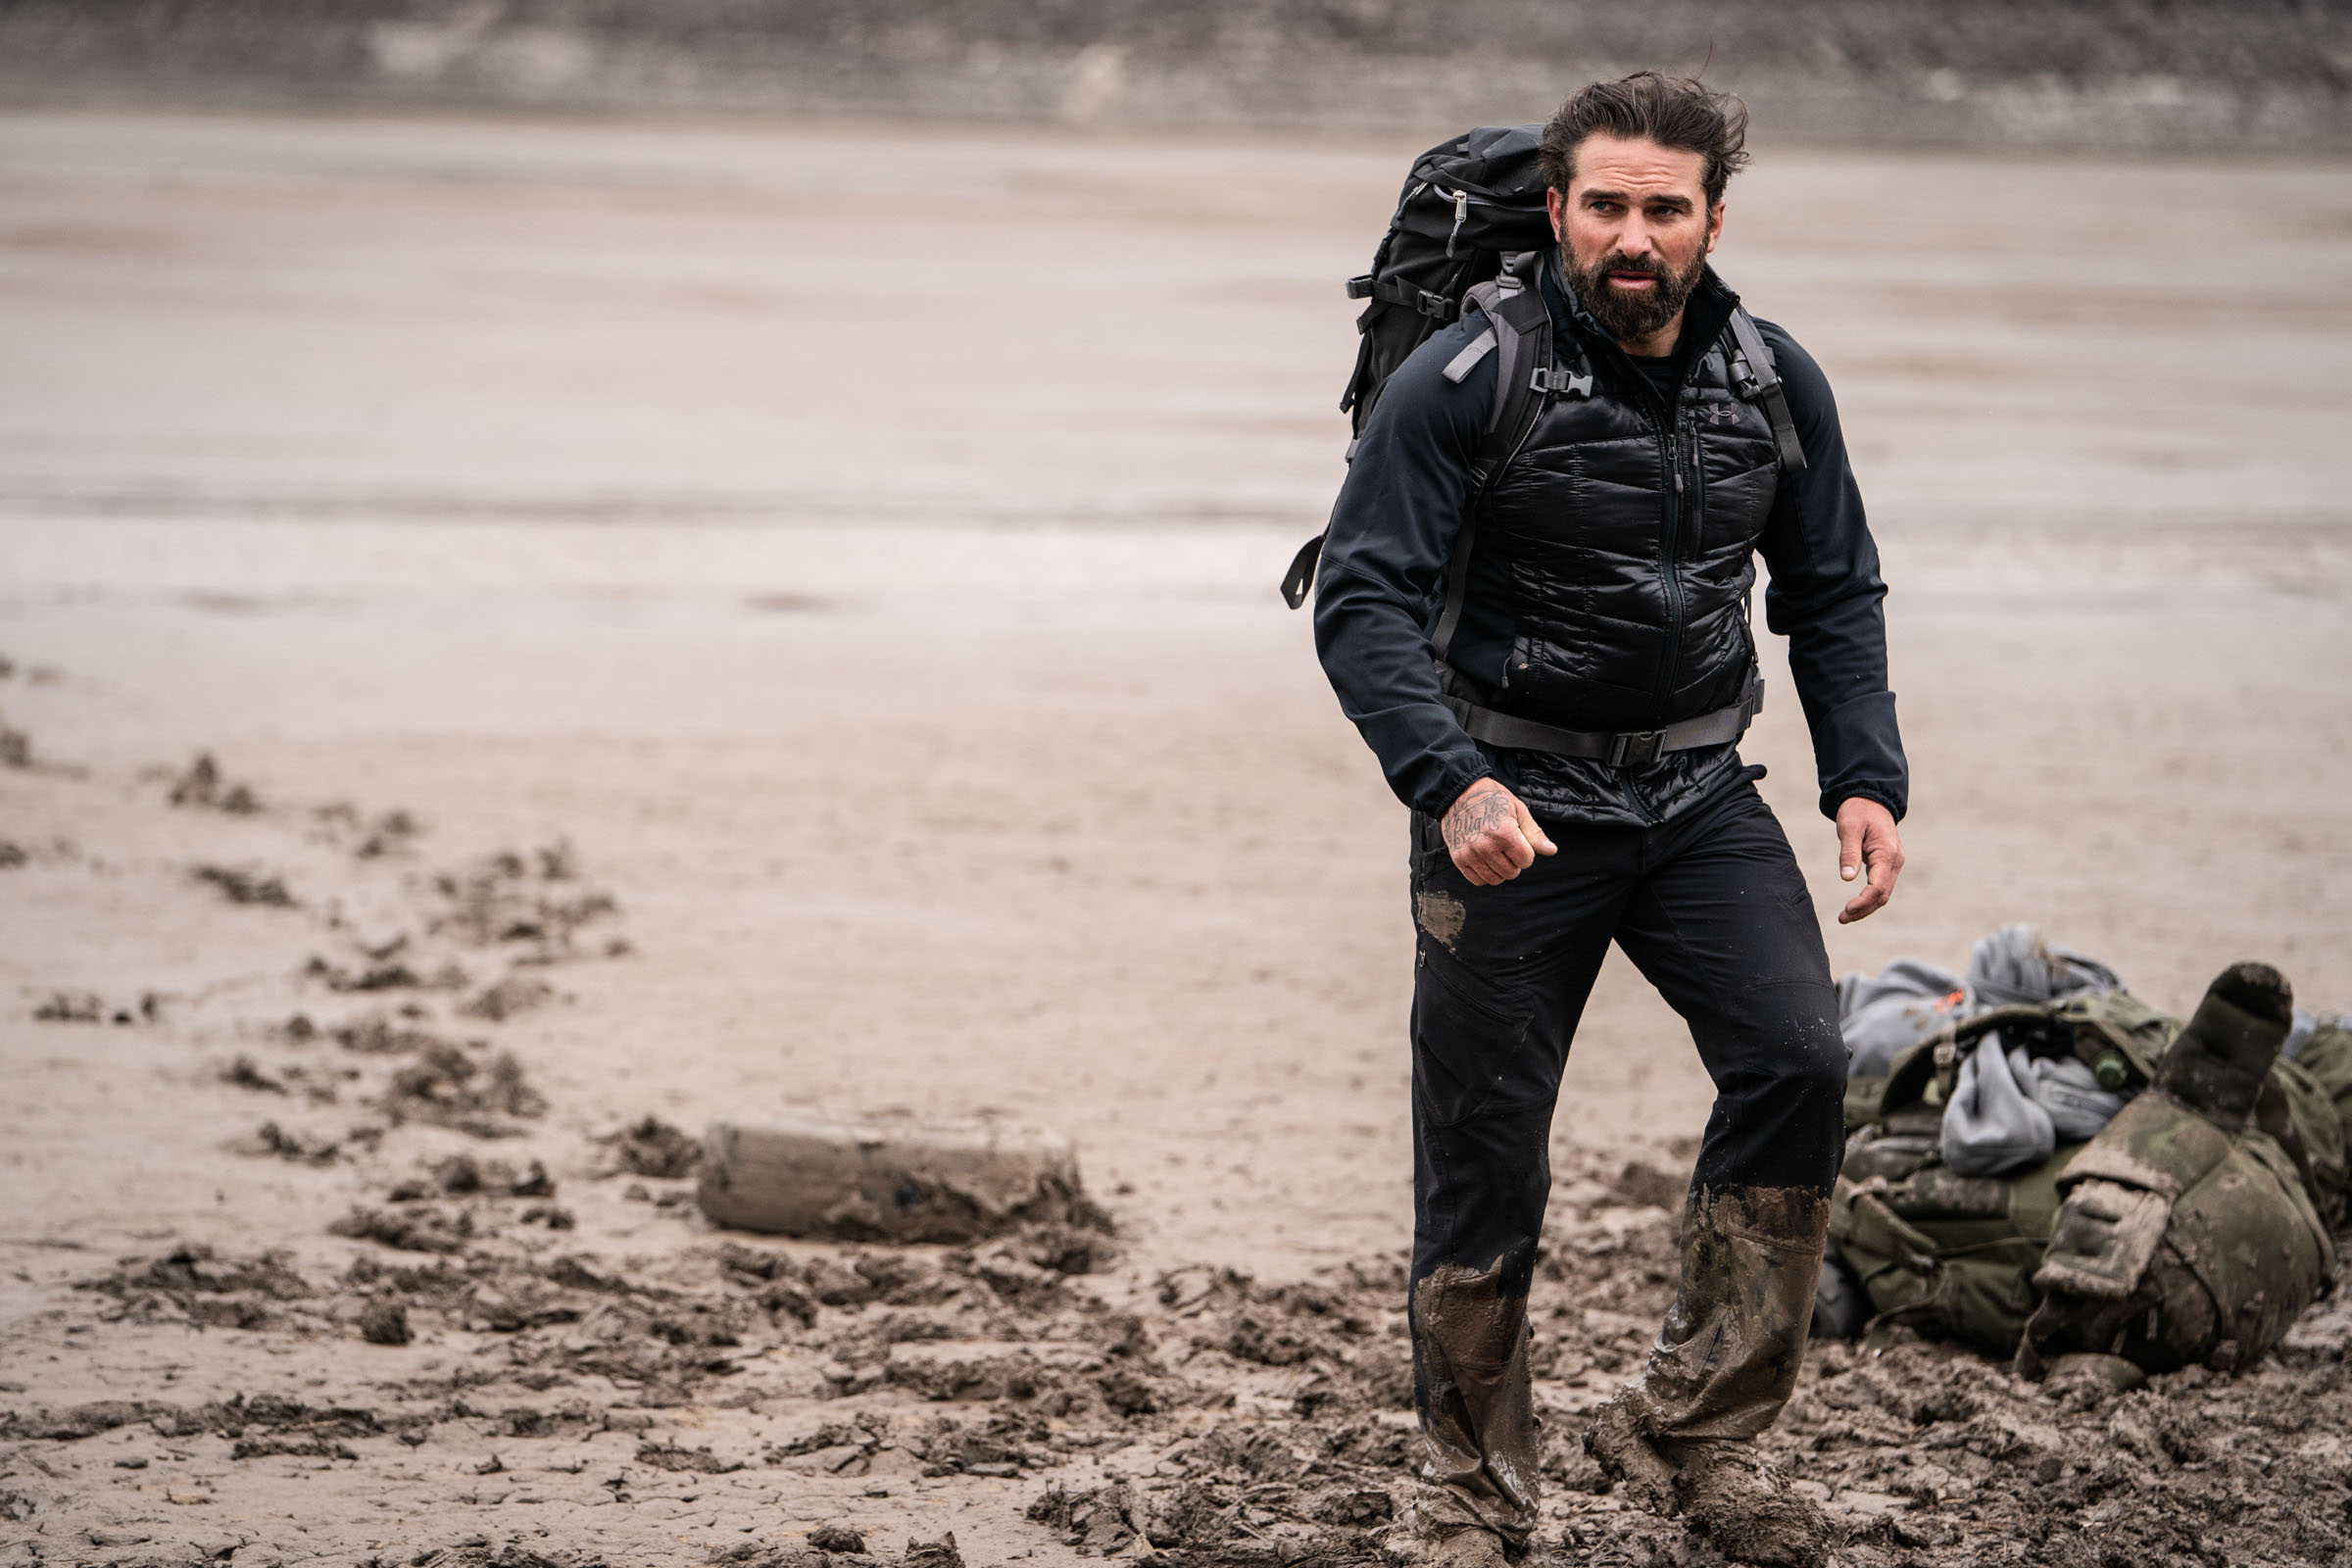  Chief Instructor Ant Middleton during the game of Murderball  Episode 2  Minnow Films / Channel 4 